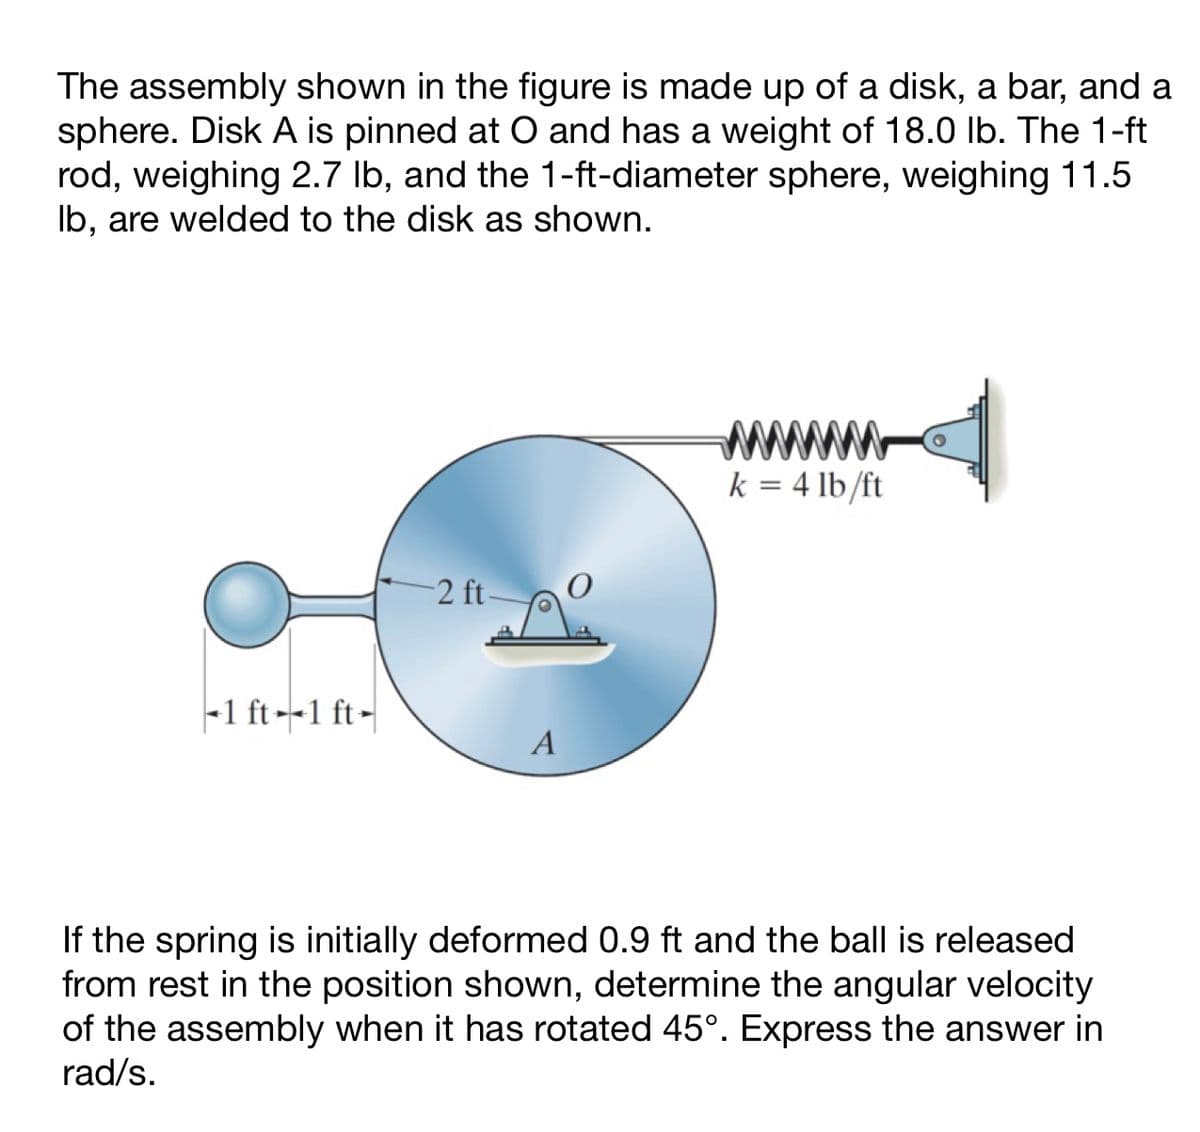 The assembly shown in the figure is made up of a disk, a bar, and a
sphere. Disk A is pinned at O and has a weight of 18.0 lb. The 1-ft
rod, weighing 2.7 lb, and the 1-ft-diameter sphere, weighing 11.5
lb, are welded to the disk as shown.
-1 ft-1 ft-
-2 ft-
A
www
k = 4 lb/ft
If the spring is initially deformed 0.9 ft and the ball is released
from rest in the position shown, determine the angular velocity
of the assembly when it has rotated 45°. Express the answer in
rad/s.